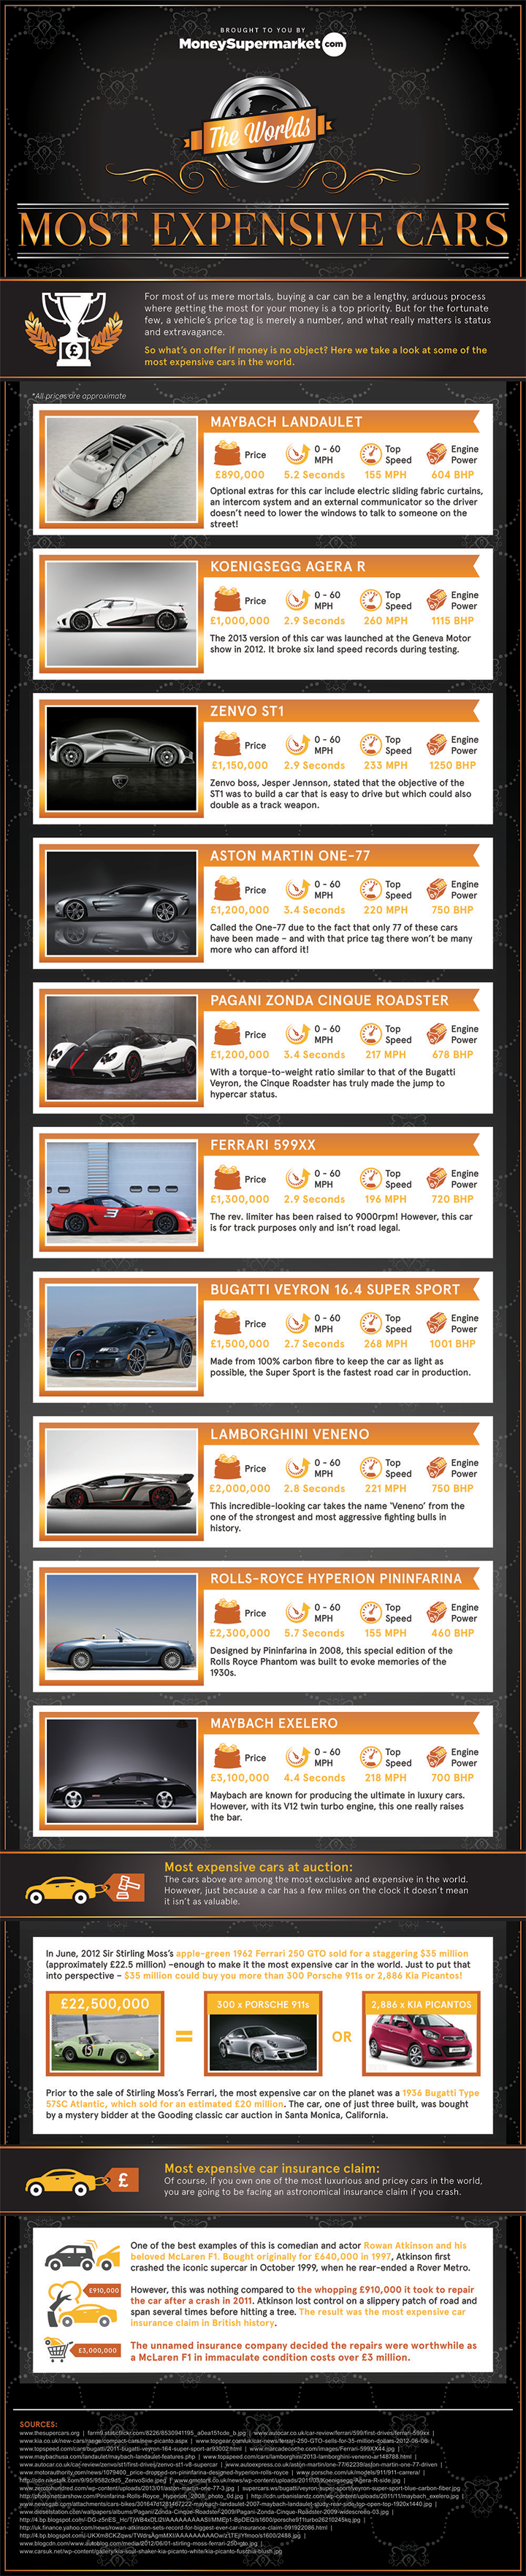 http://infographicjournal.com/wp-content/uploads/2013/06/World_s_Most_Expensive_Cars_Infographic_7201.png